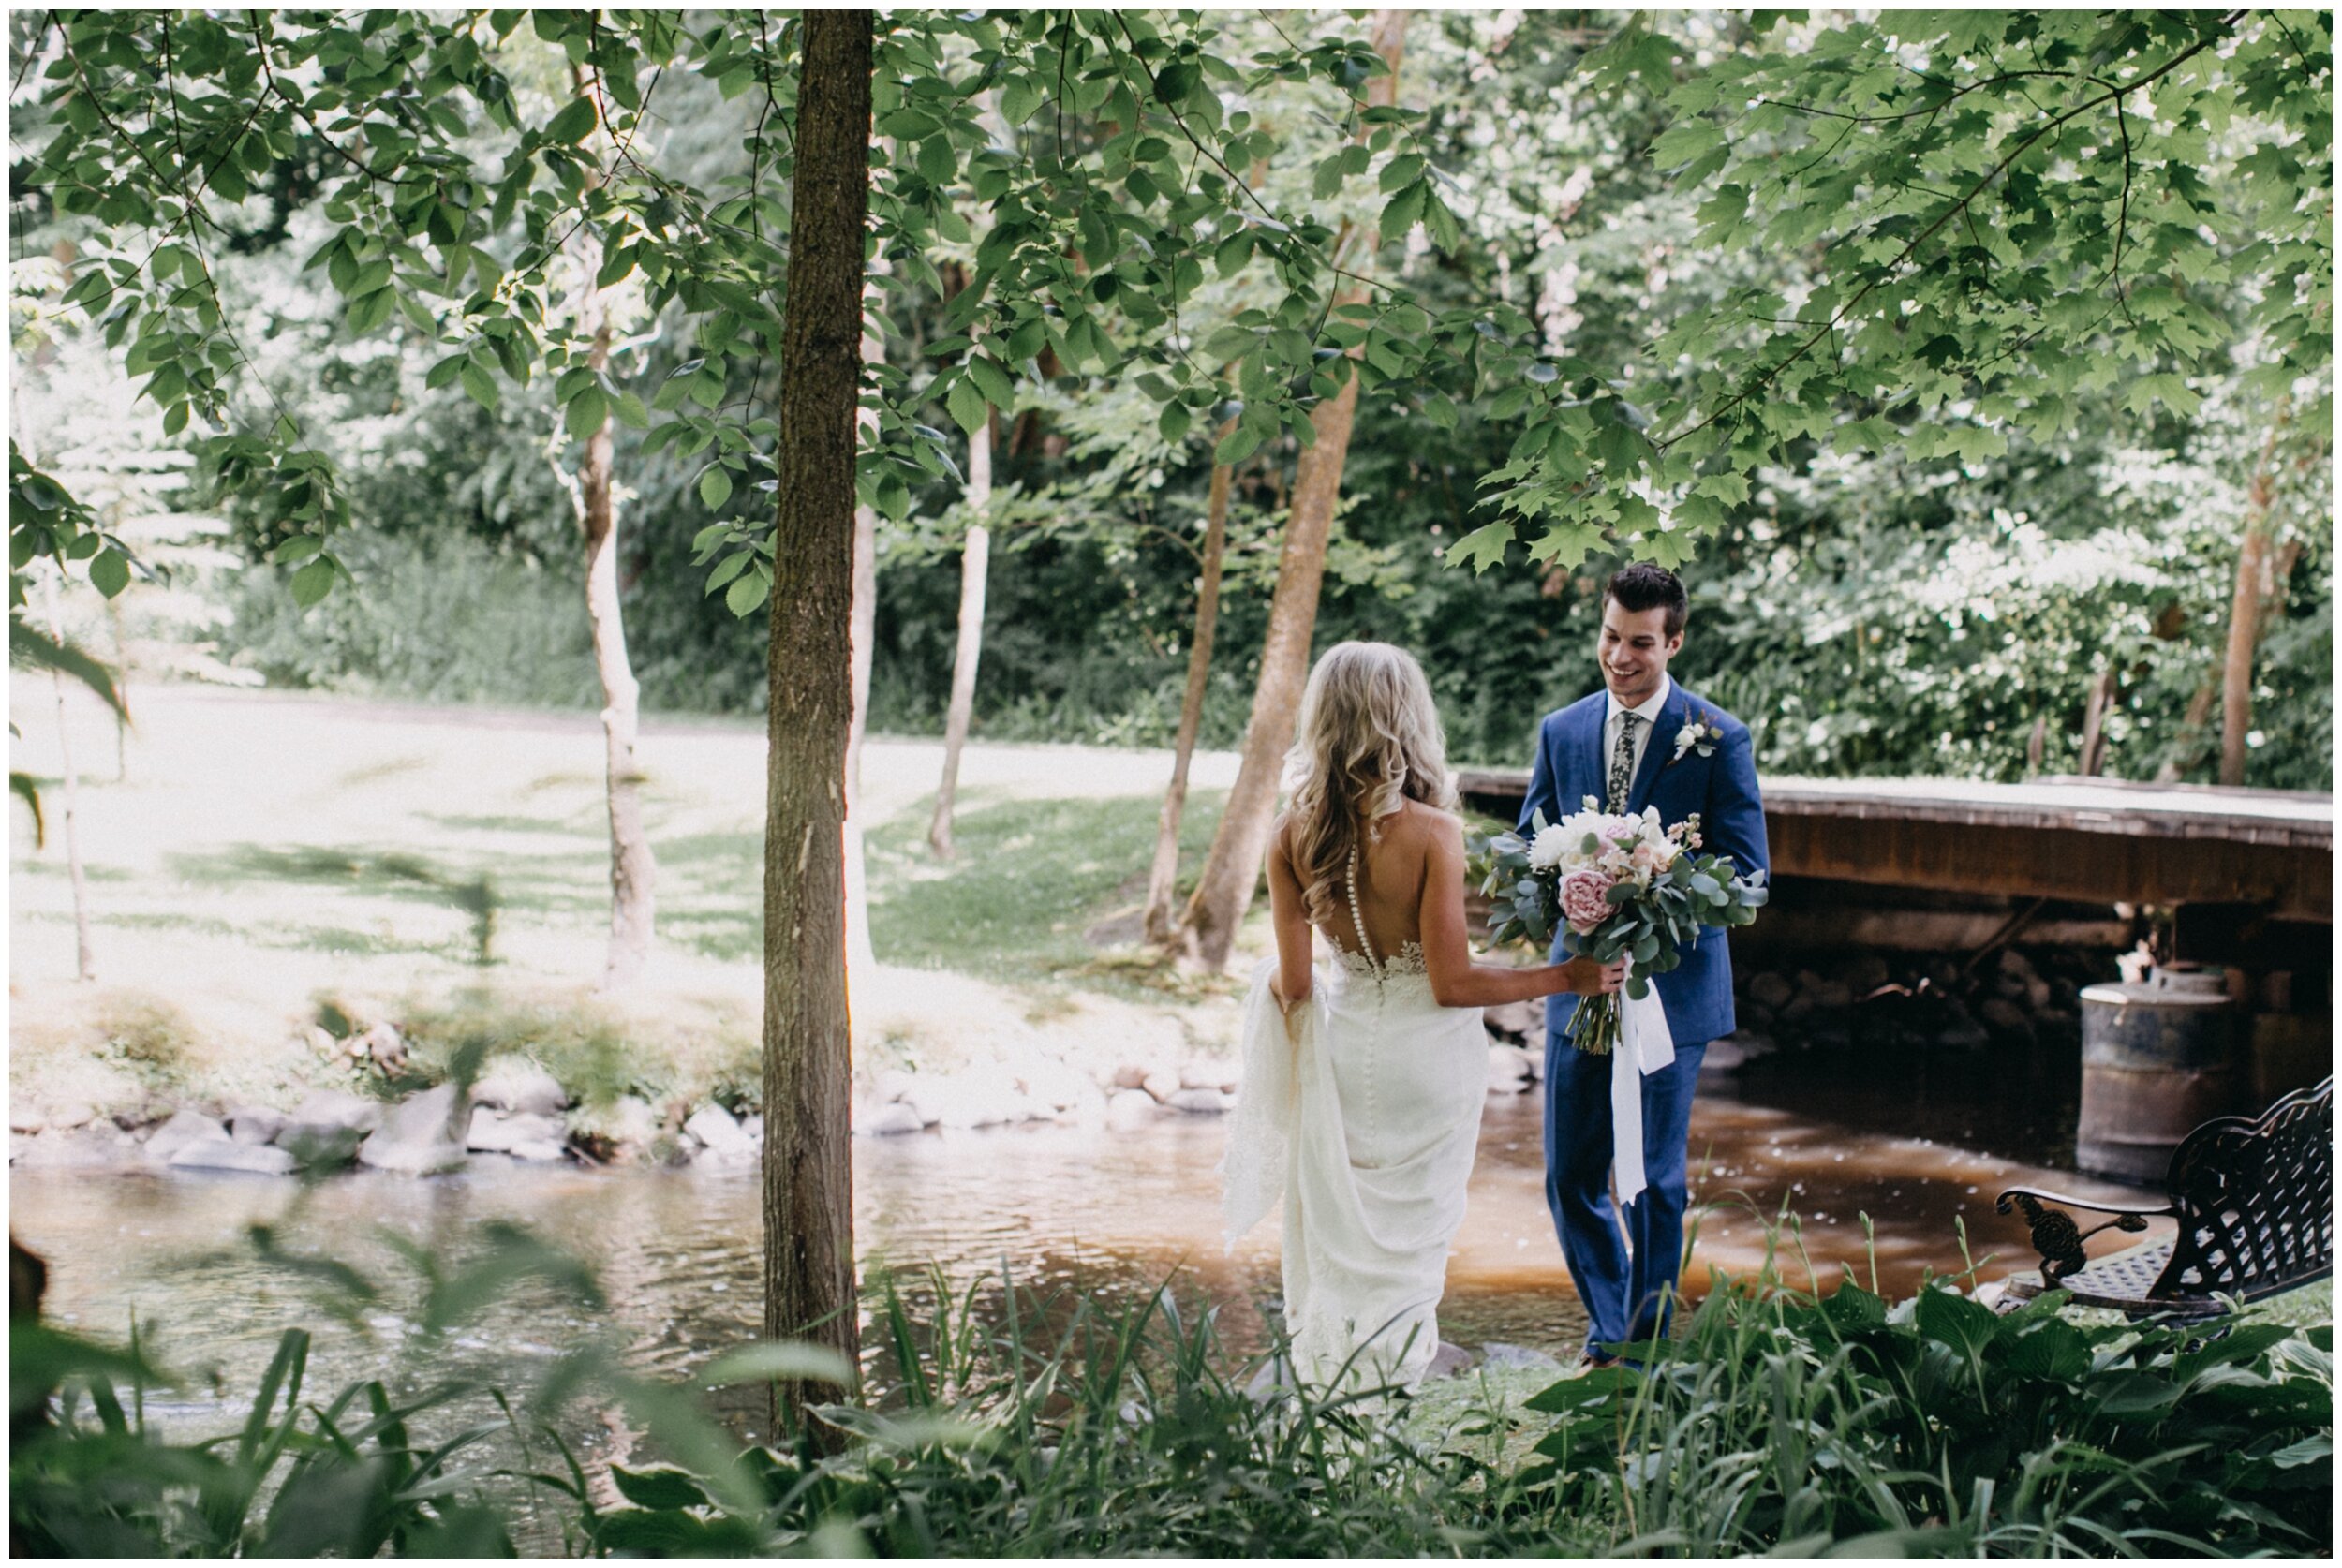 Bride and groom first look in the woods at Minnesota barn wedding venue